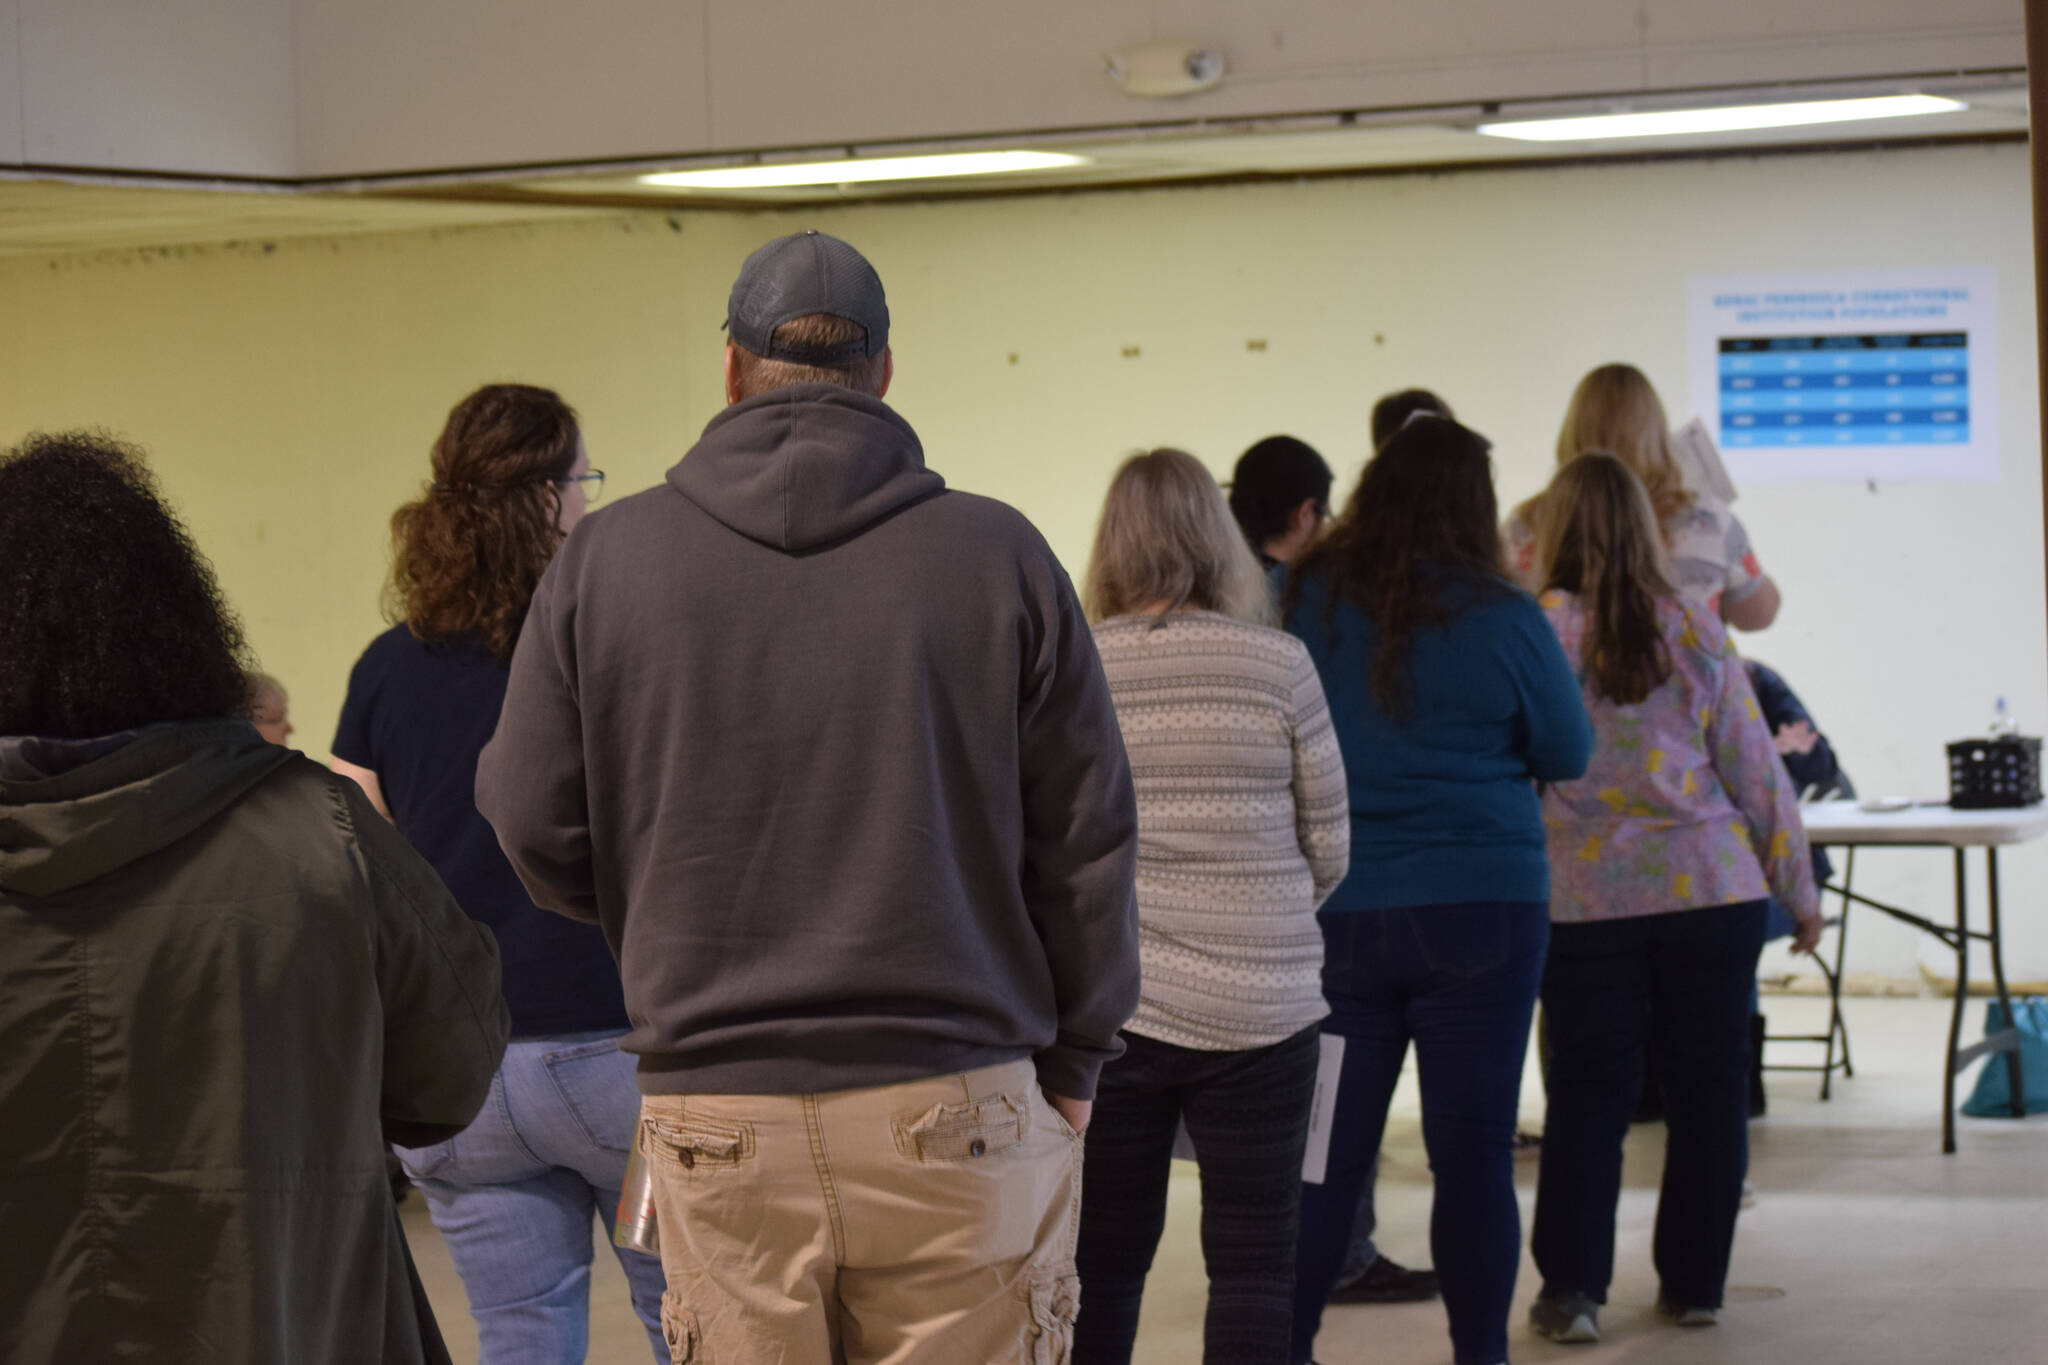 Participants wait in line for DMV services at the Kenai Peninsula Re-Entry Coalition simulation at the Old Carrs Mall in Kenai, Alaska, on Saturday, April 2, 2022. The event was intended to give community members an understanding of the challenges faced by those leaving incarceration. (Camille Botello/Peninsula Clarion)